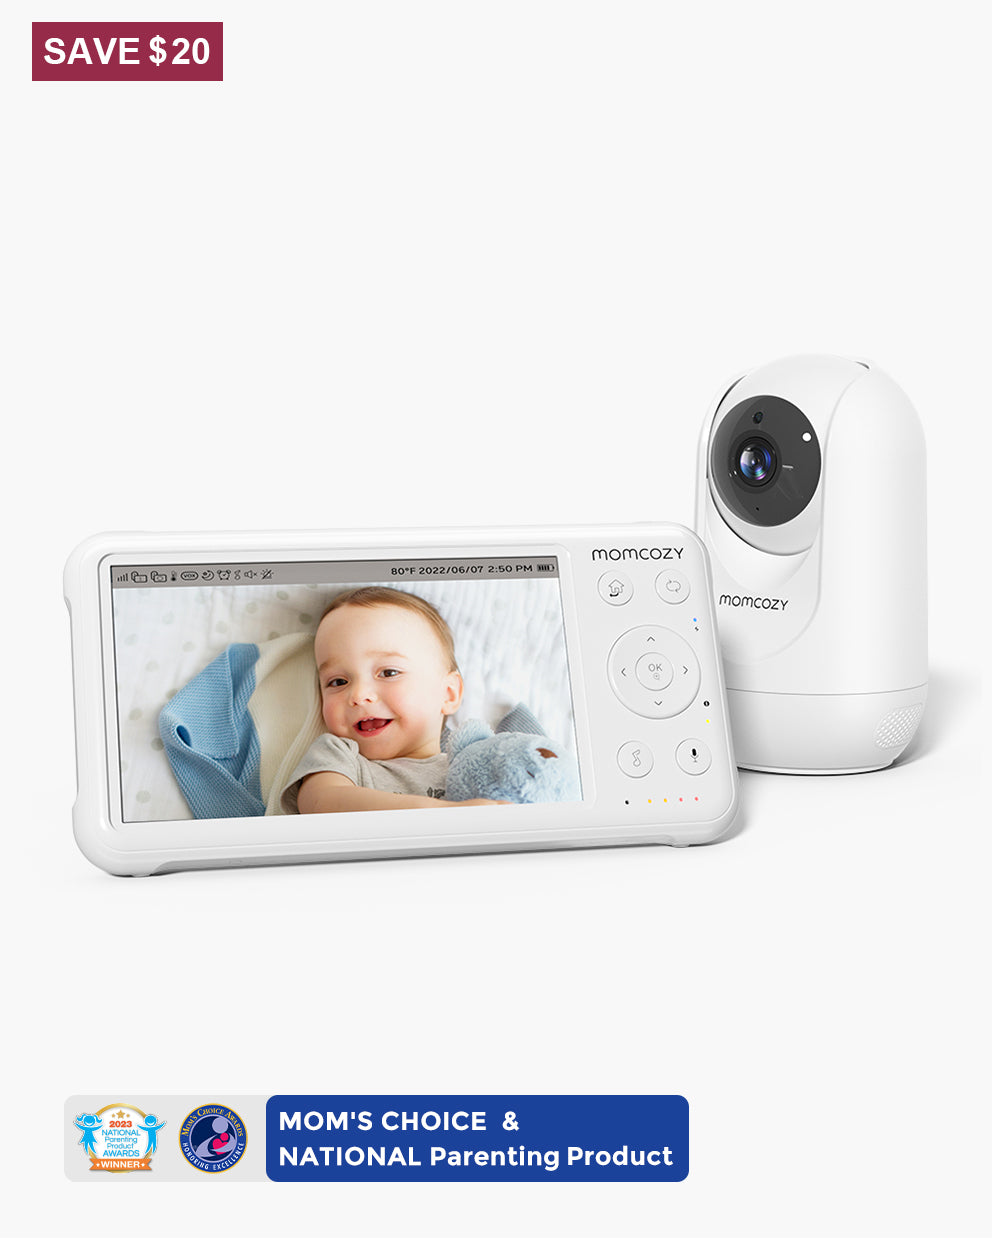 1080P High - Performance Video Baby Monitor